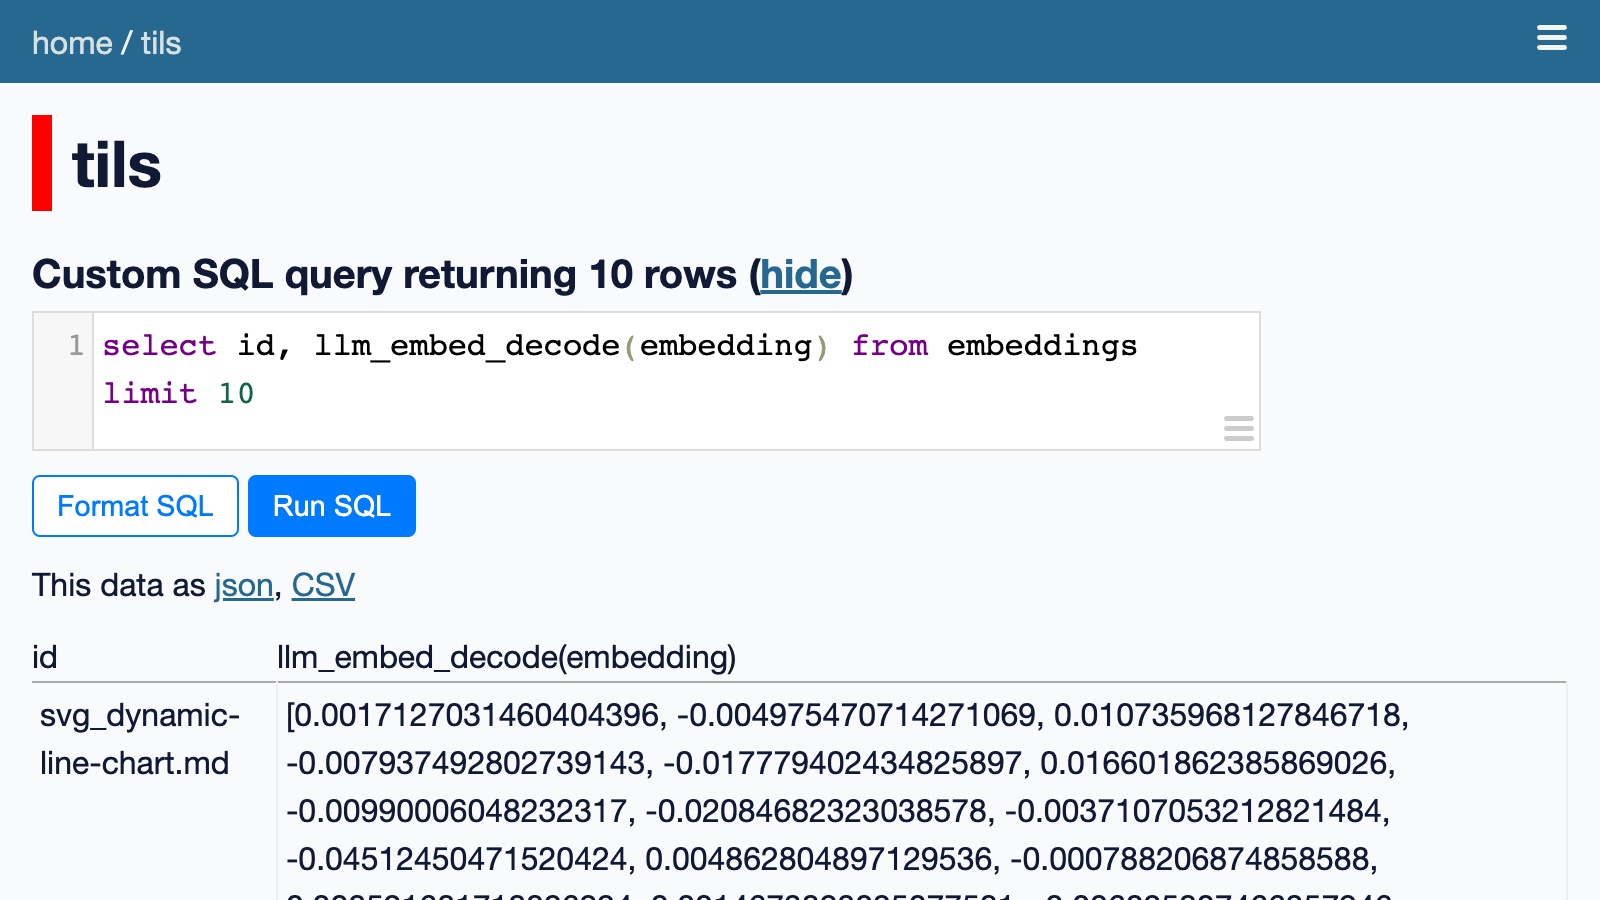 Now the SQL query returns a JSON array of floating point numbers for each ID